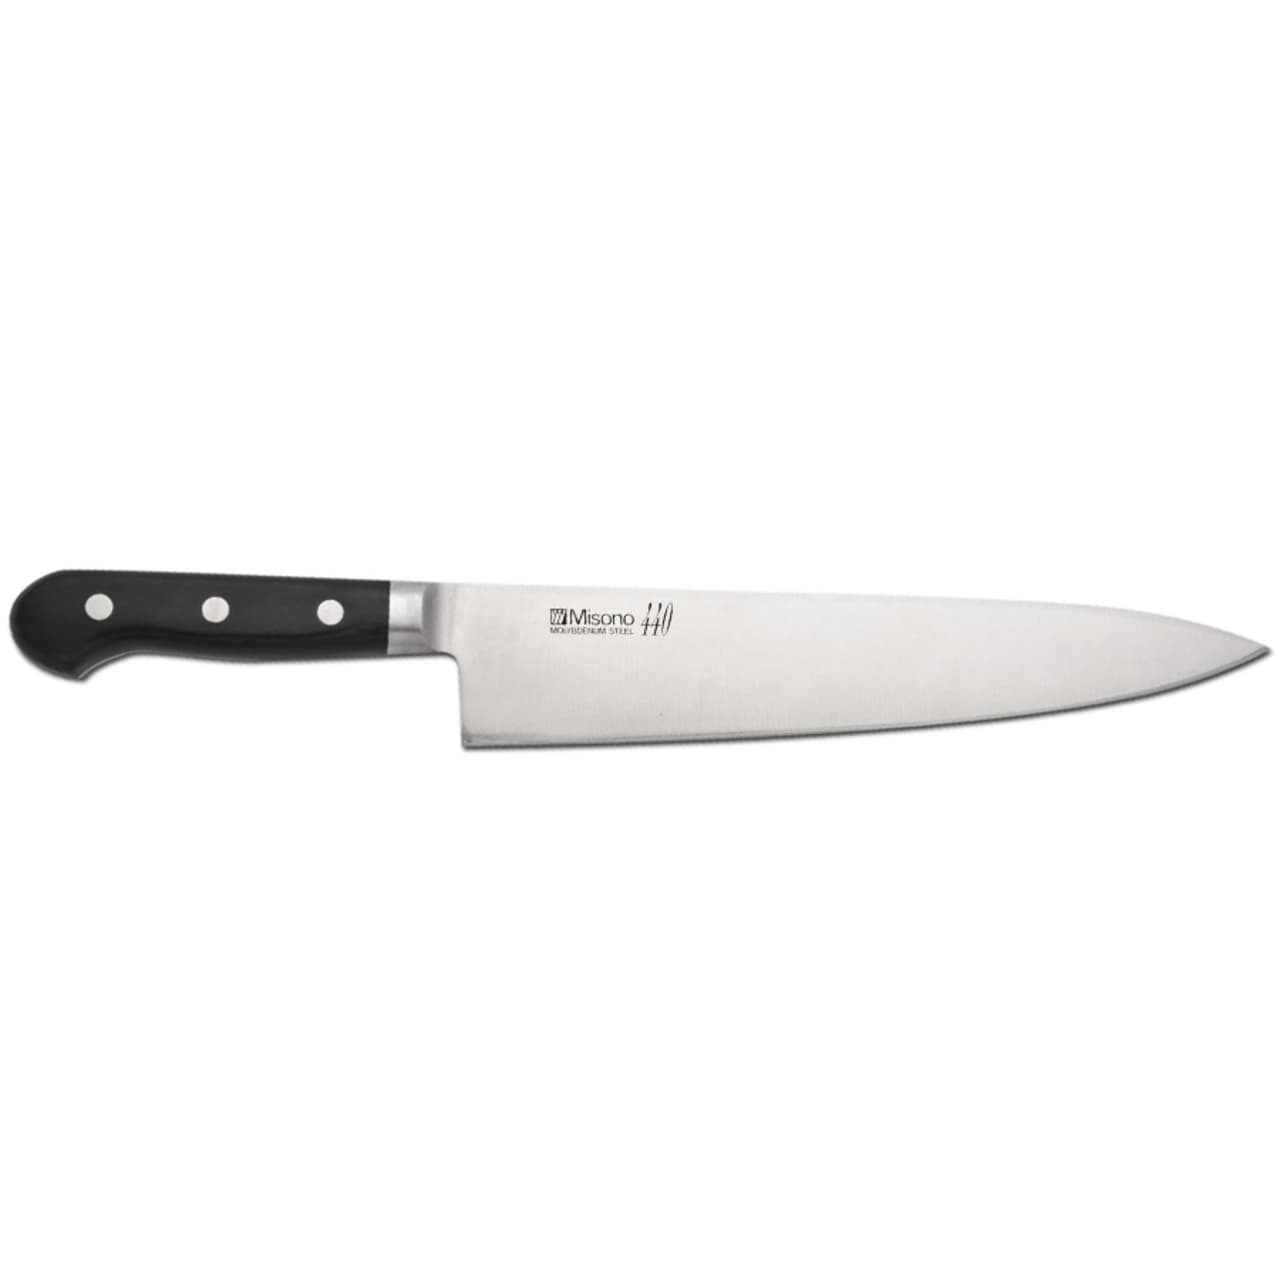 MAC MTH-80 Chef's Knife Review - Forbes Vetted